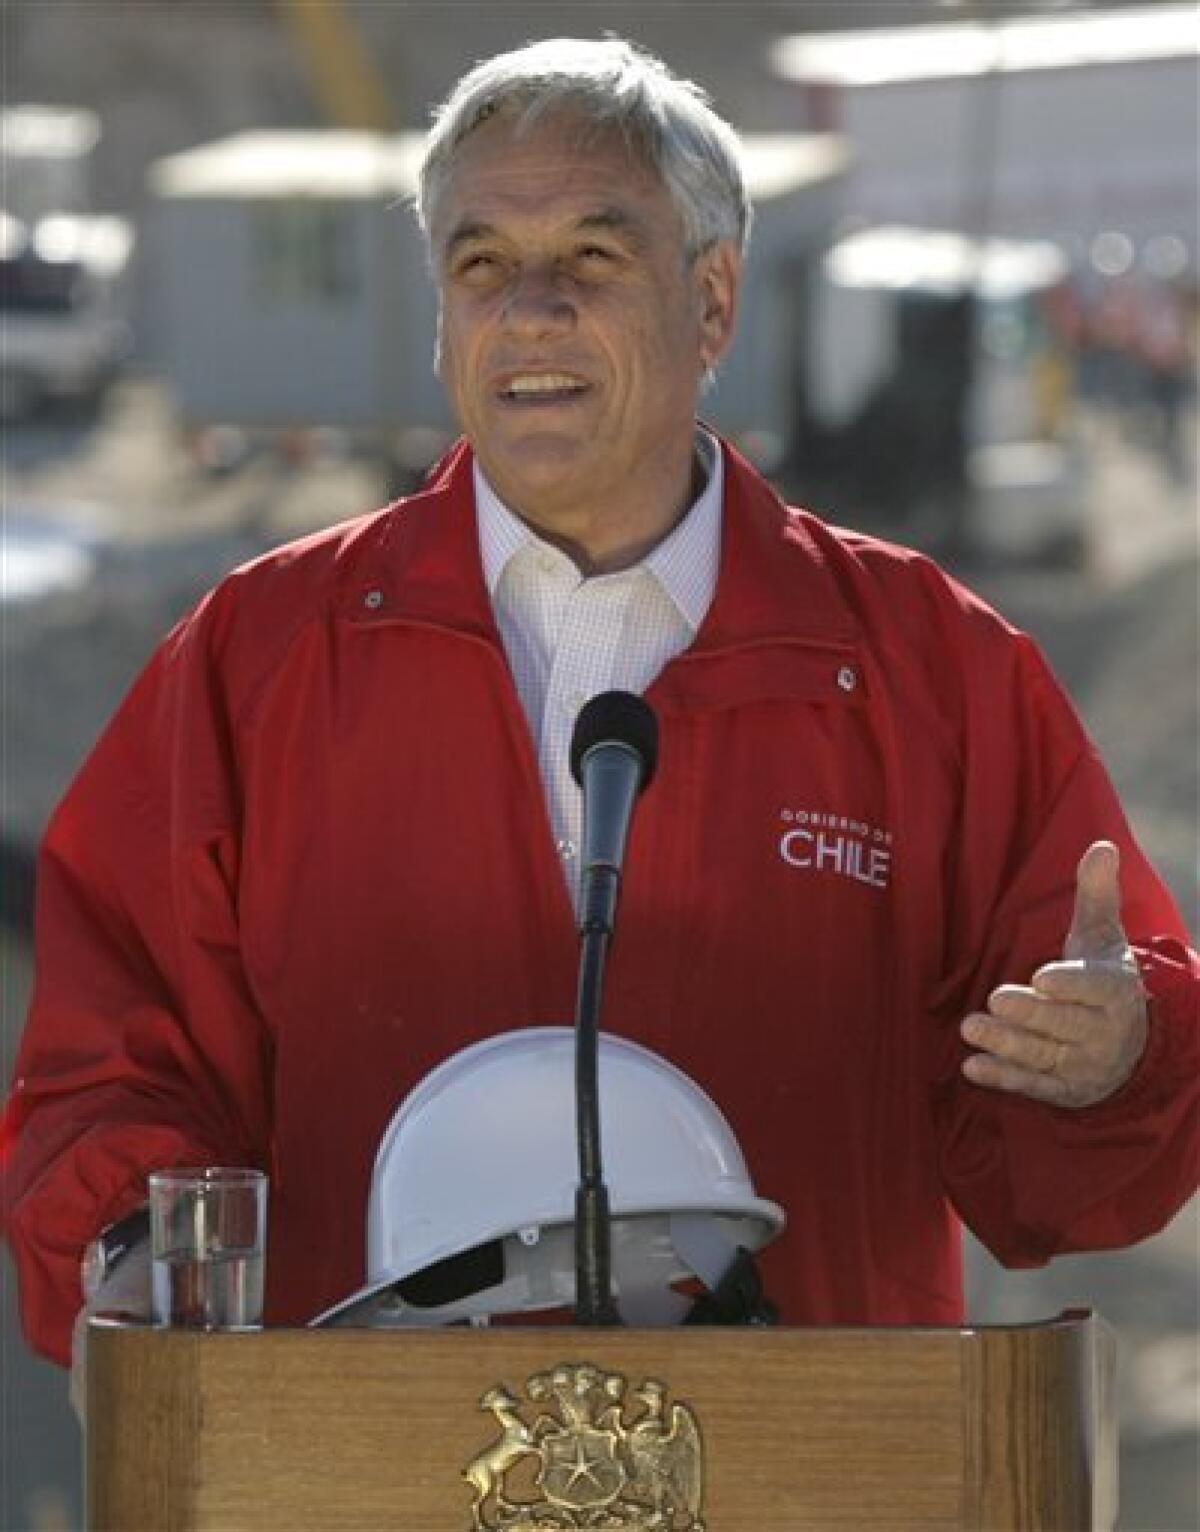 Chile's President Sebastian Pinera talks to the press at the San Jose mine near Copiapo, Chile, Tuesday, Oct. 12, 2010. The first of 33 trapped miners is expected to be lifted to the surface late Tuesday, after surviving more than two months below ground. (AP Photo/Jorge Saenz)